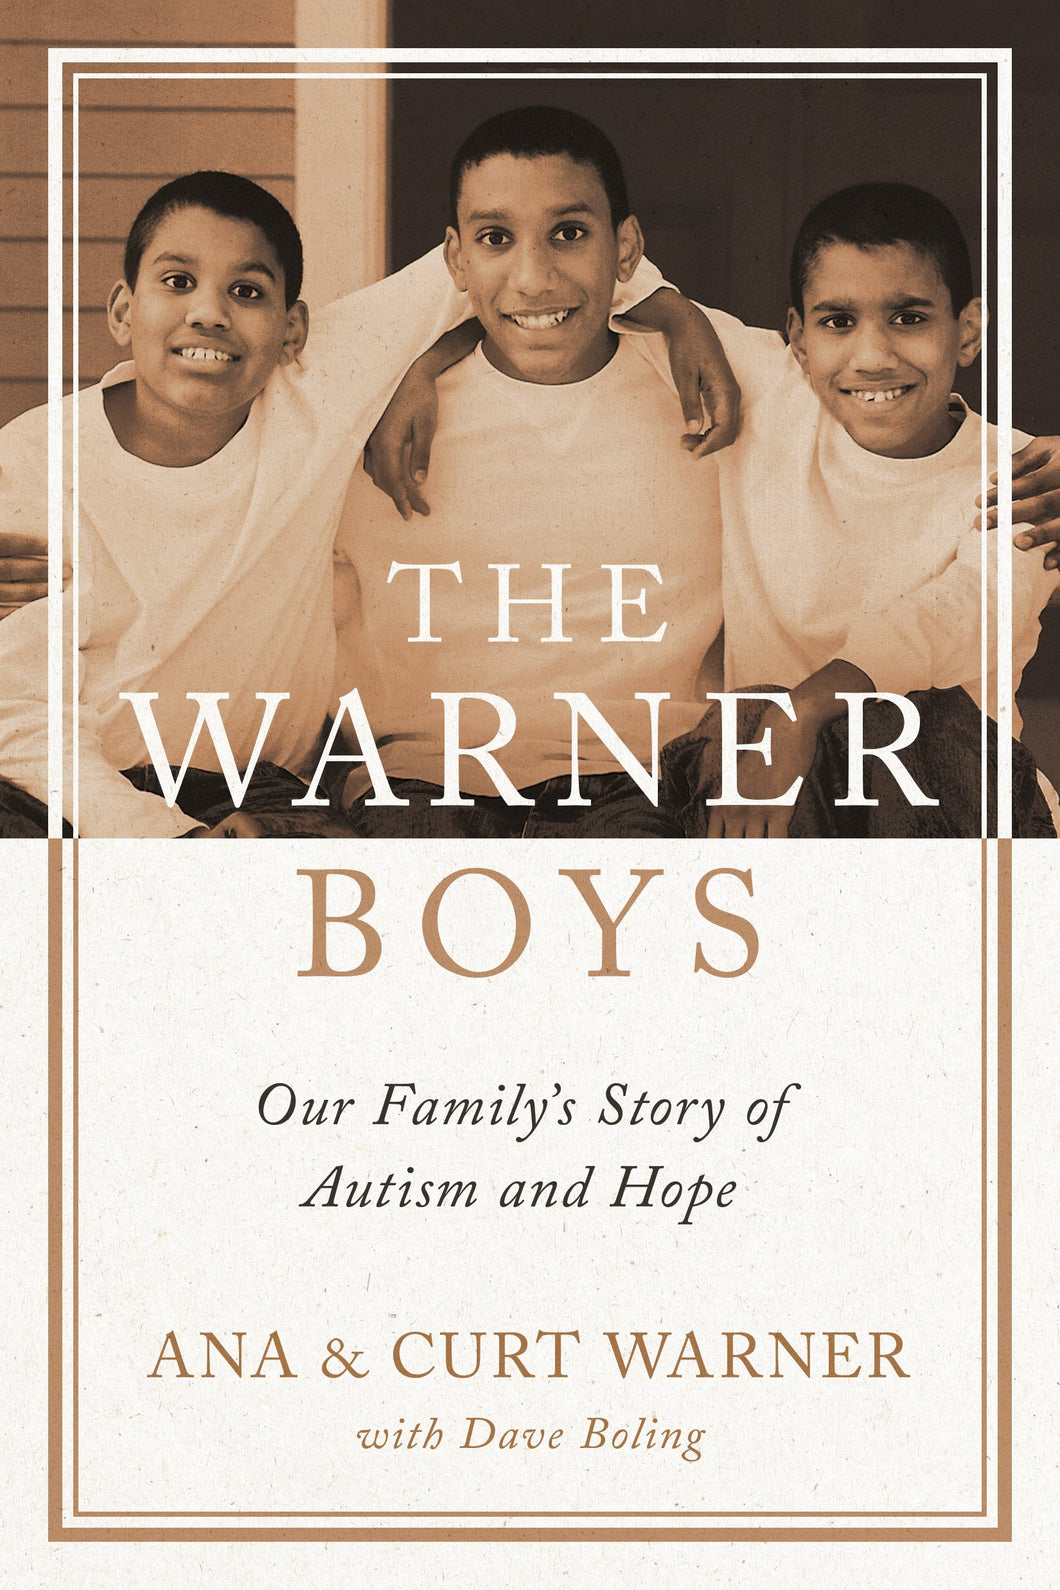 The Warner Boys: Our Family’s Story of Autism and Hope